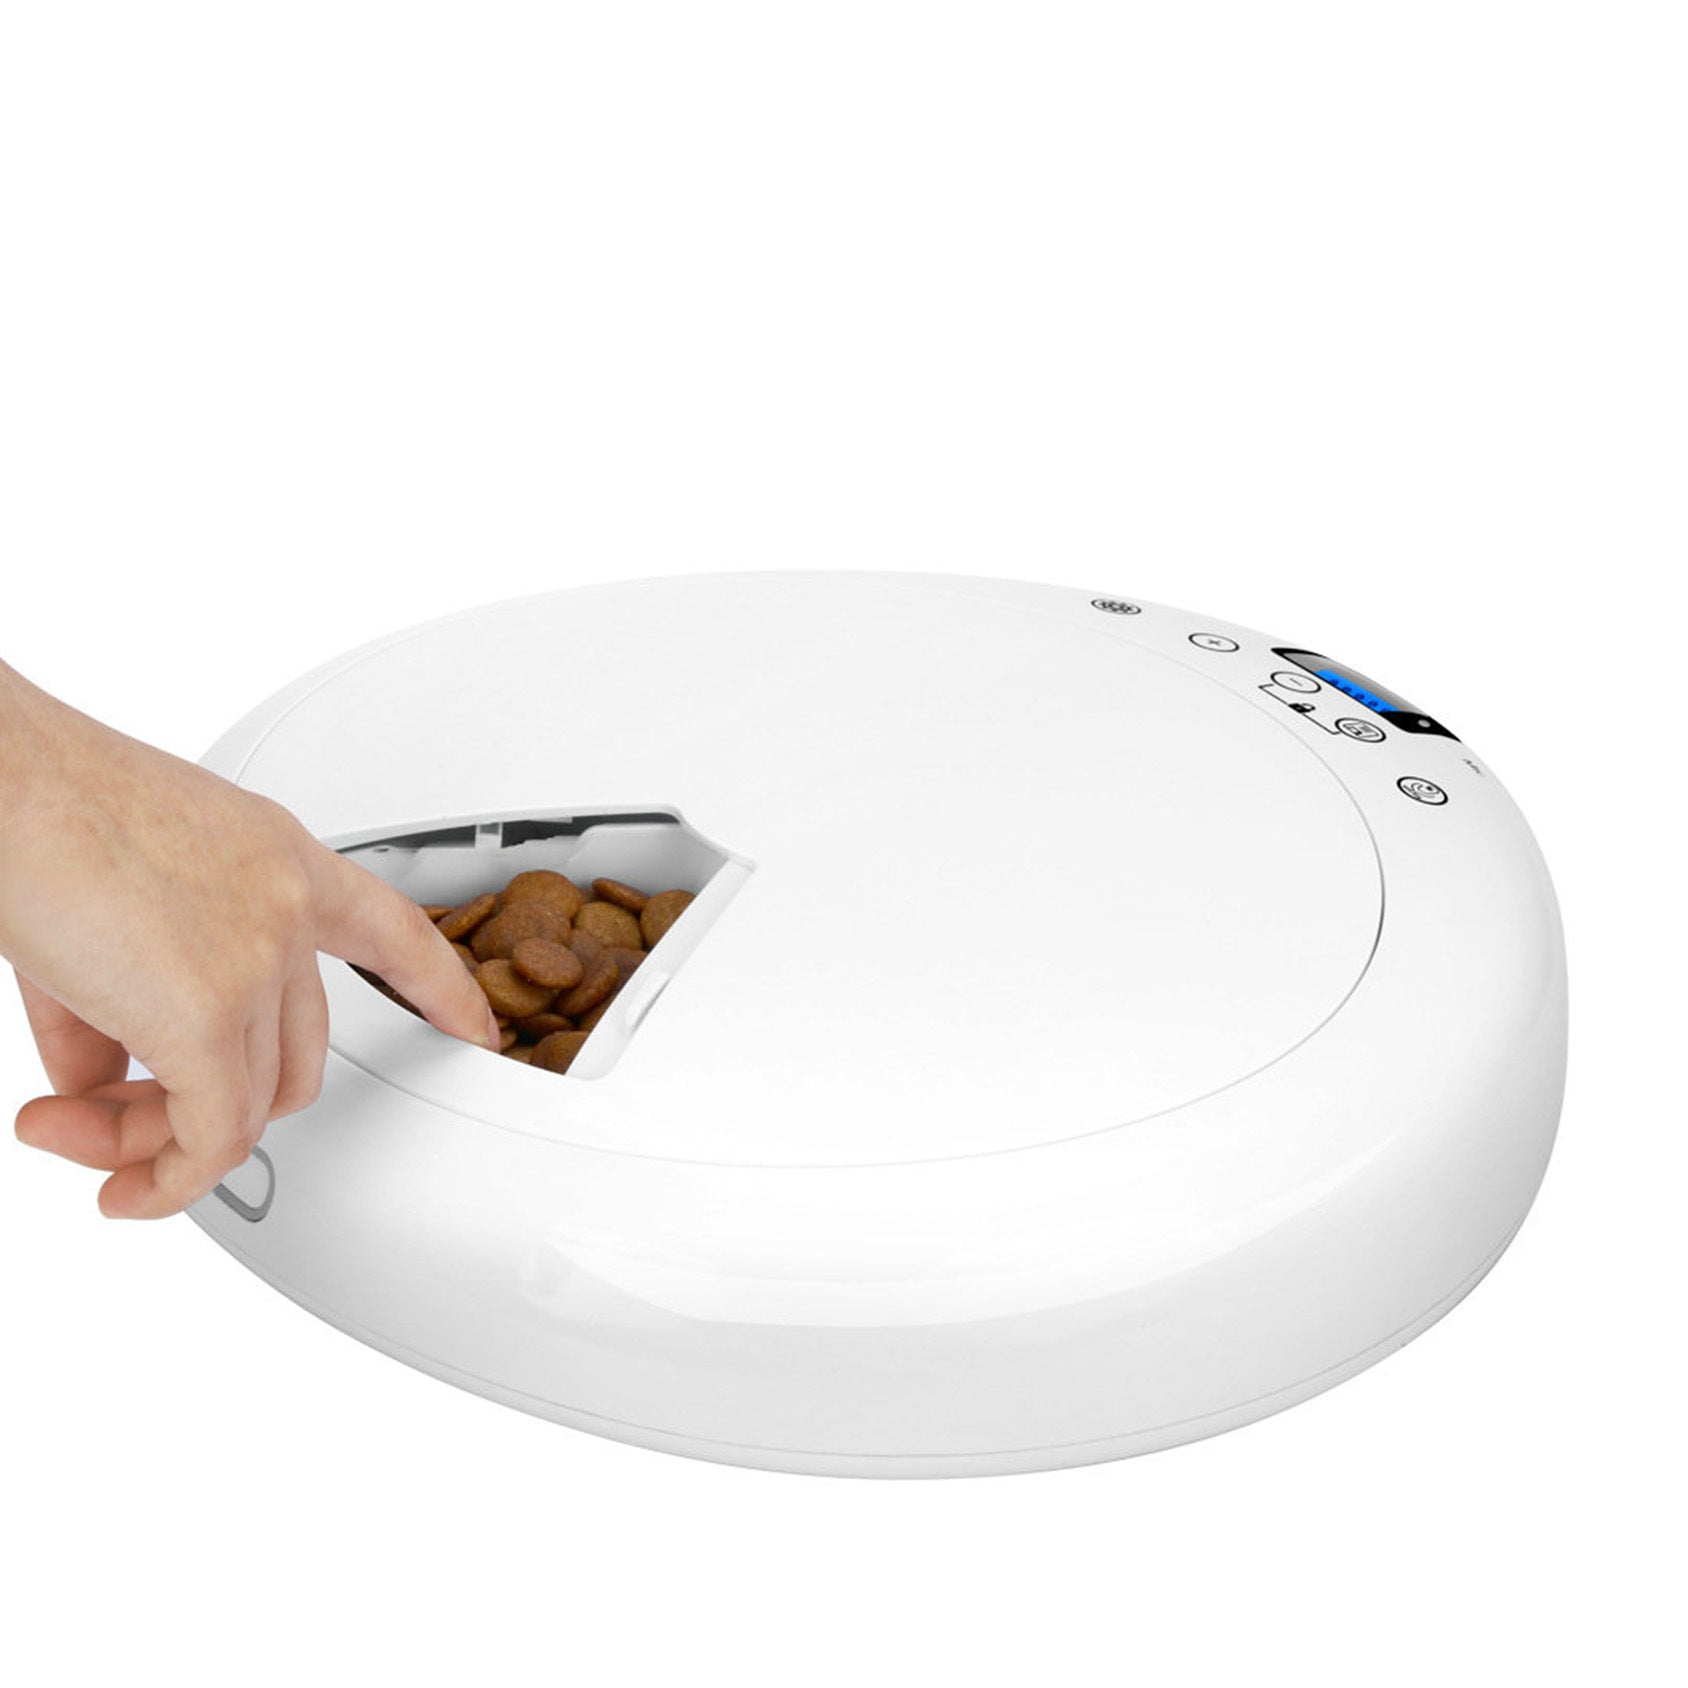 Automatic Pet Feeder 6-meals Portion With Digital Timer Food Dispenser Wet And Dry Foods - White